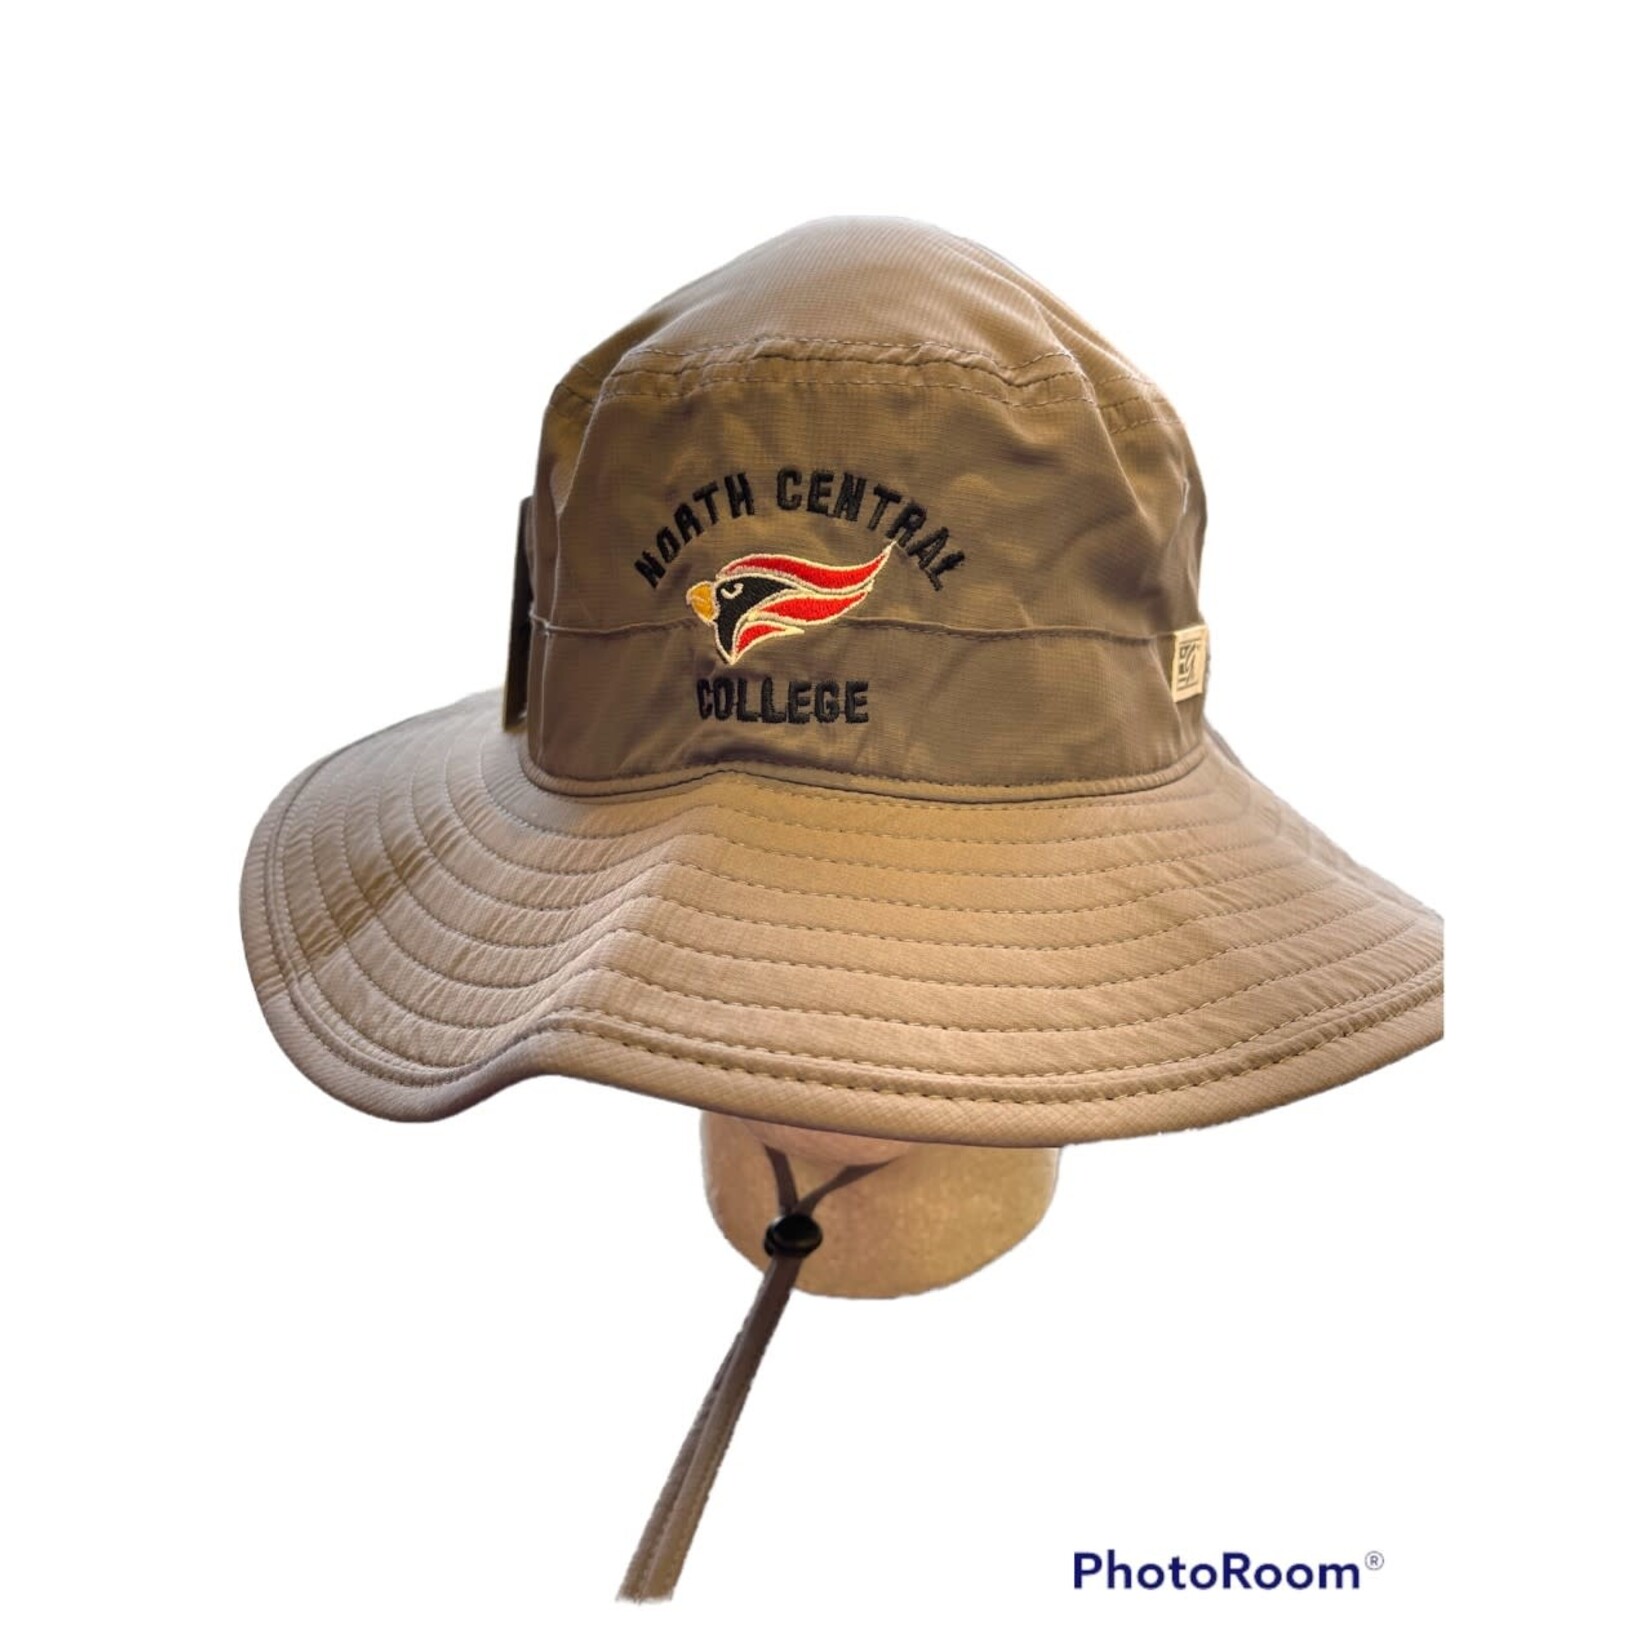 The Game Ultralight Boonie Hat w/ cardinal head